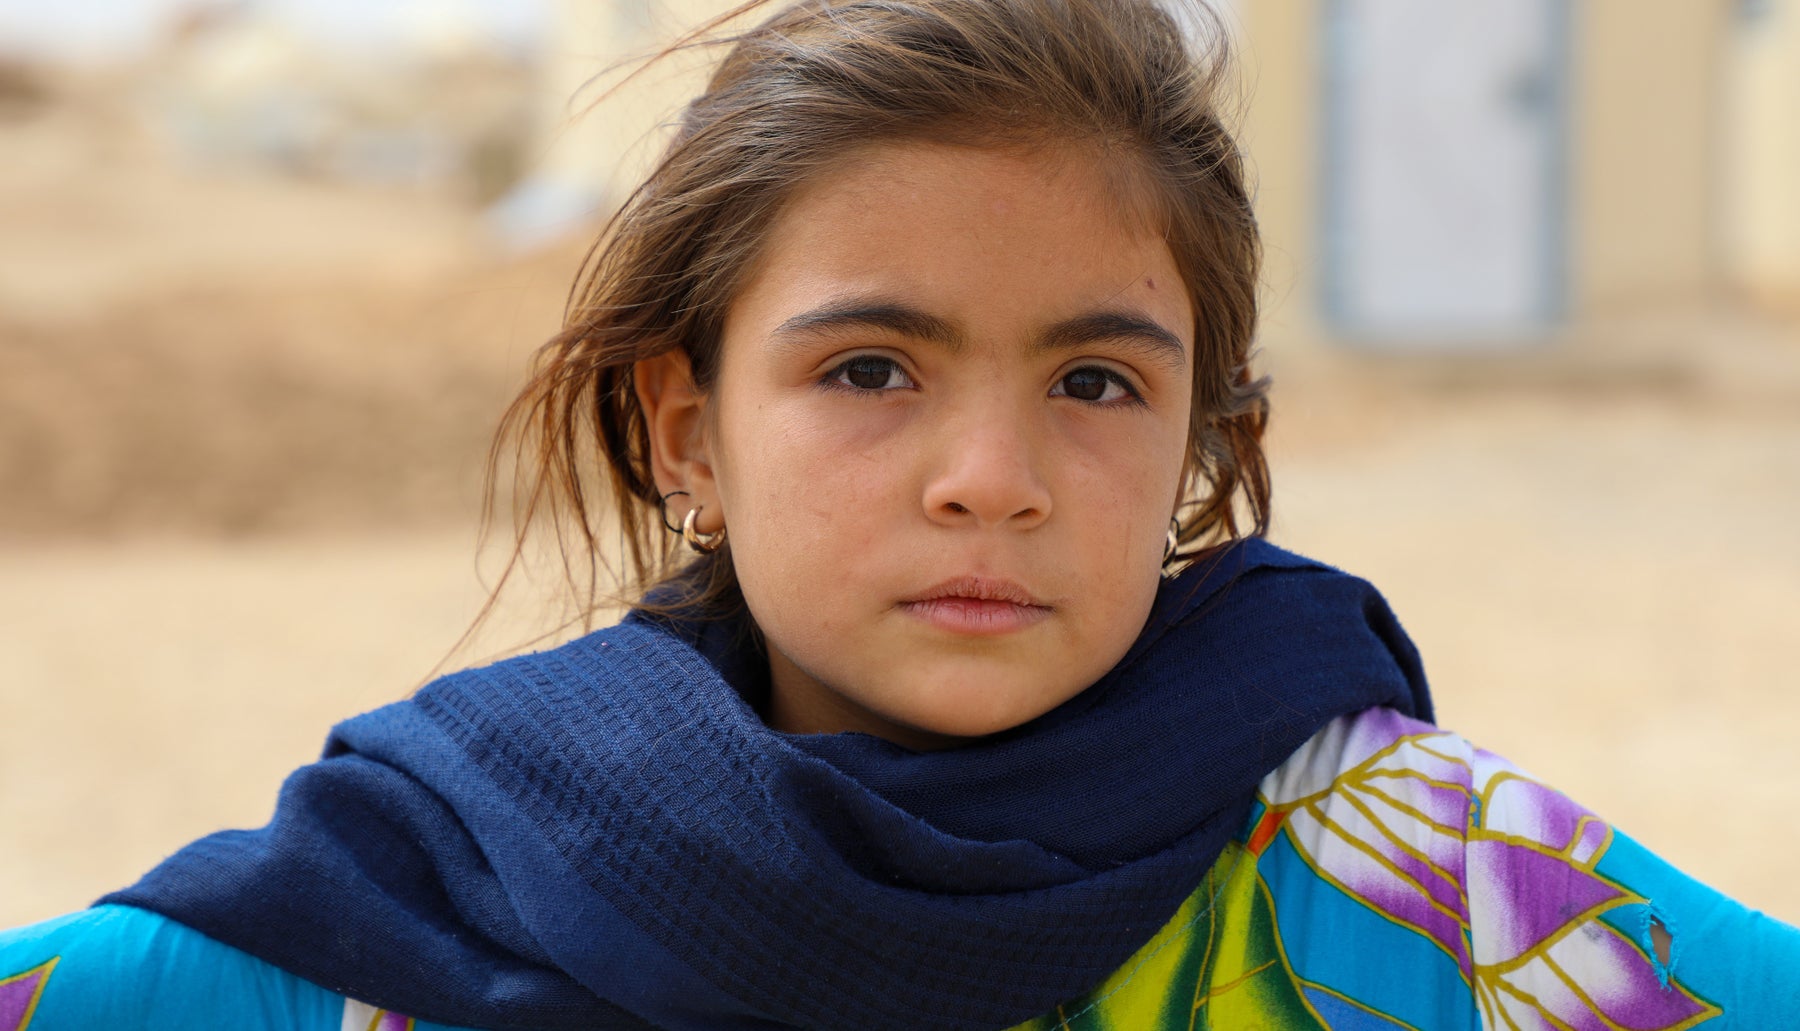 Child looking at camera, Northern Afghanistan